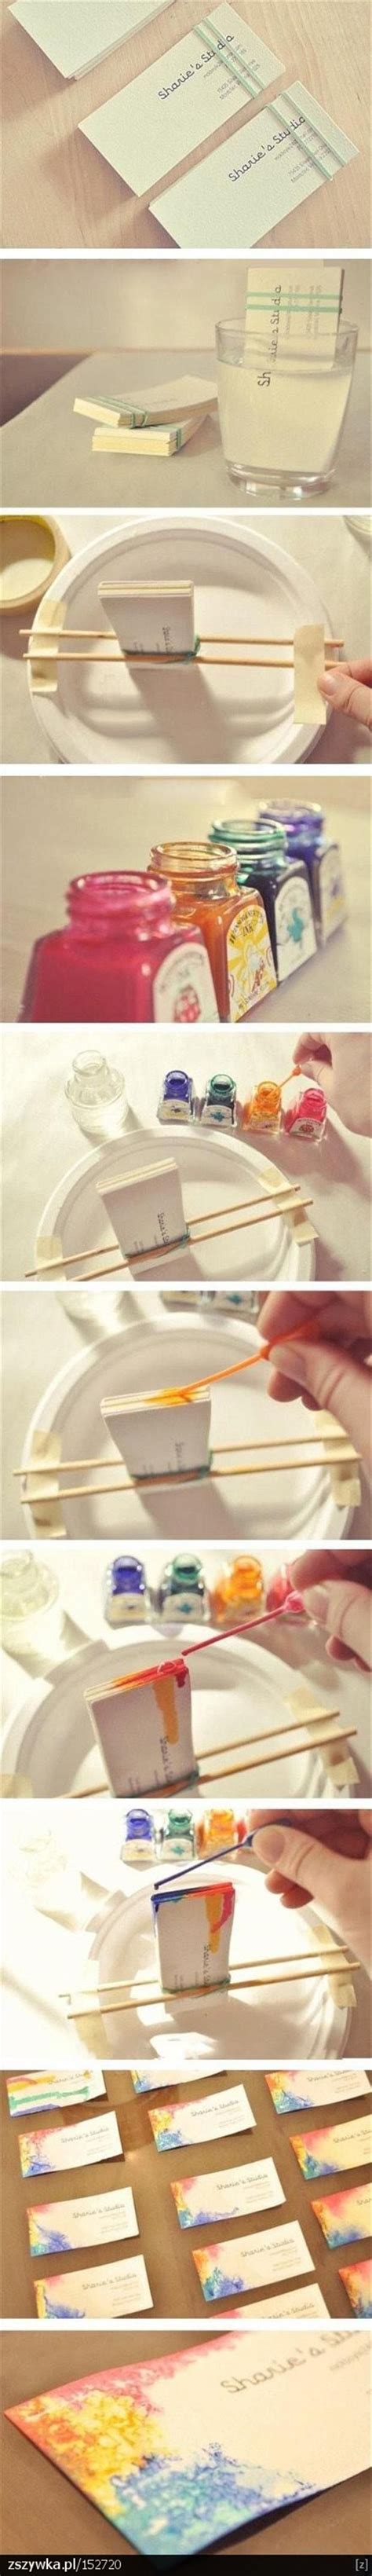 Dump A Day Fun Do It Yourself Craft Ideas 45 Pics Diy Projects To Try